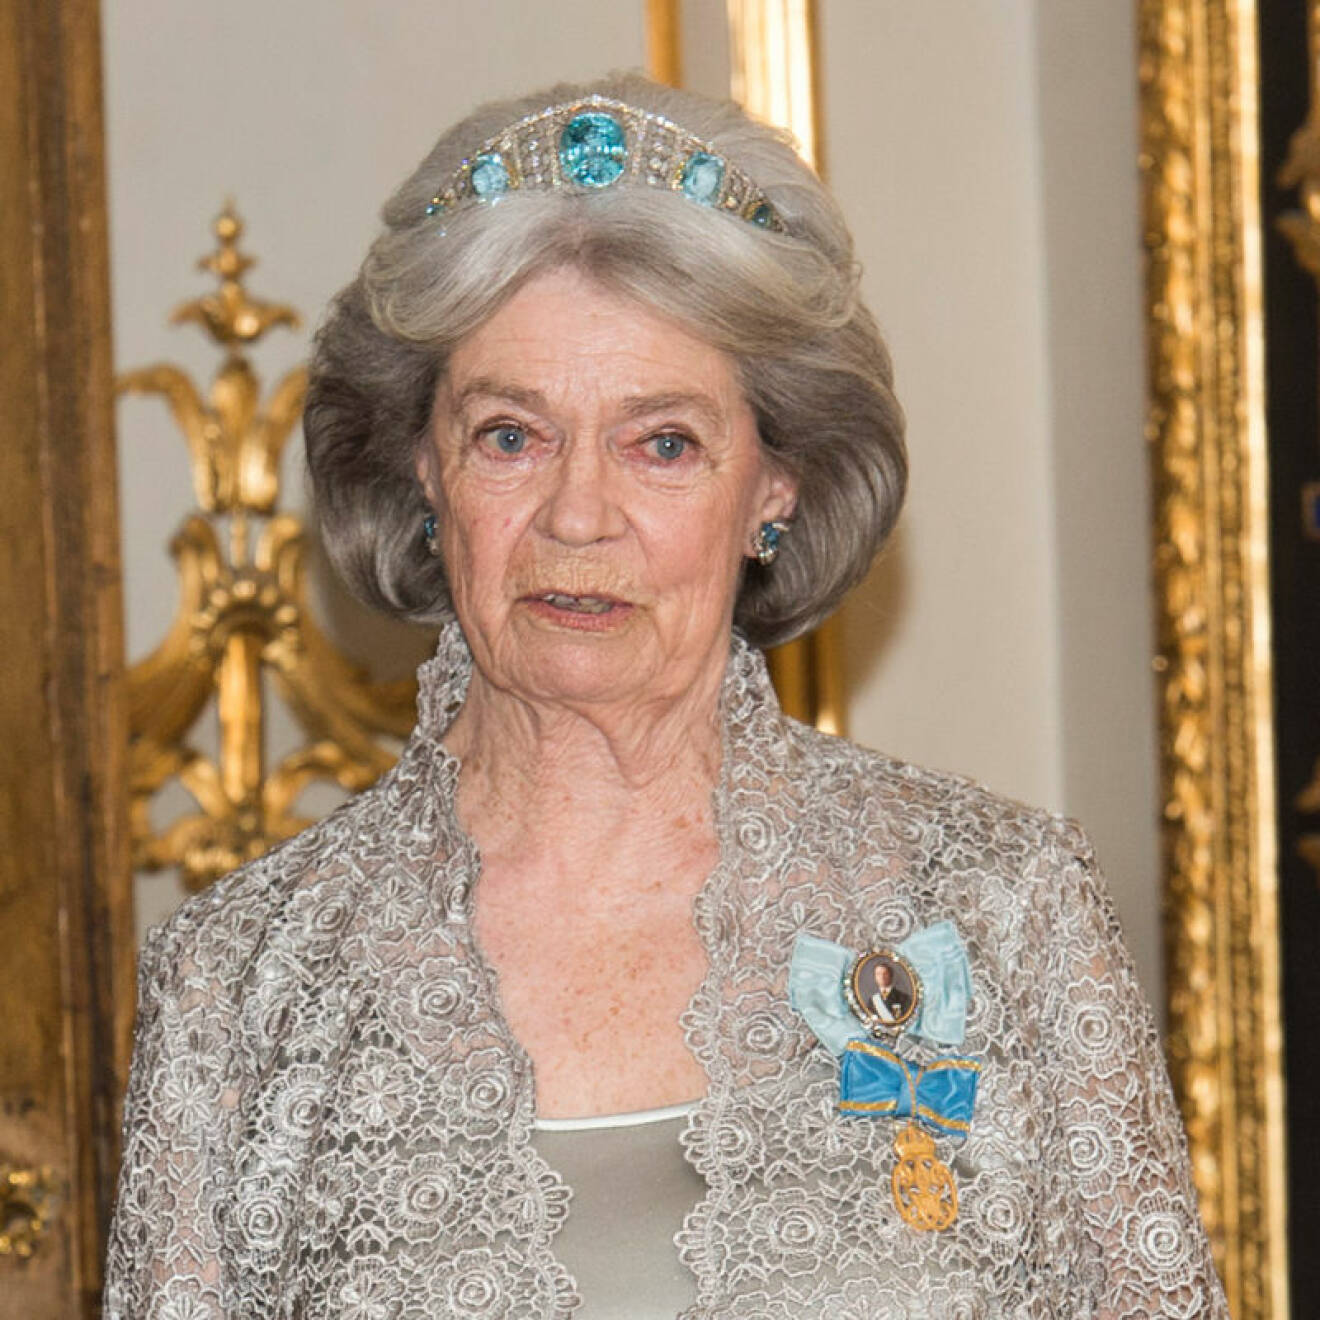 Kungens syster prinsessan Margaretha.